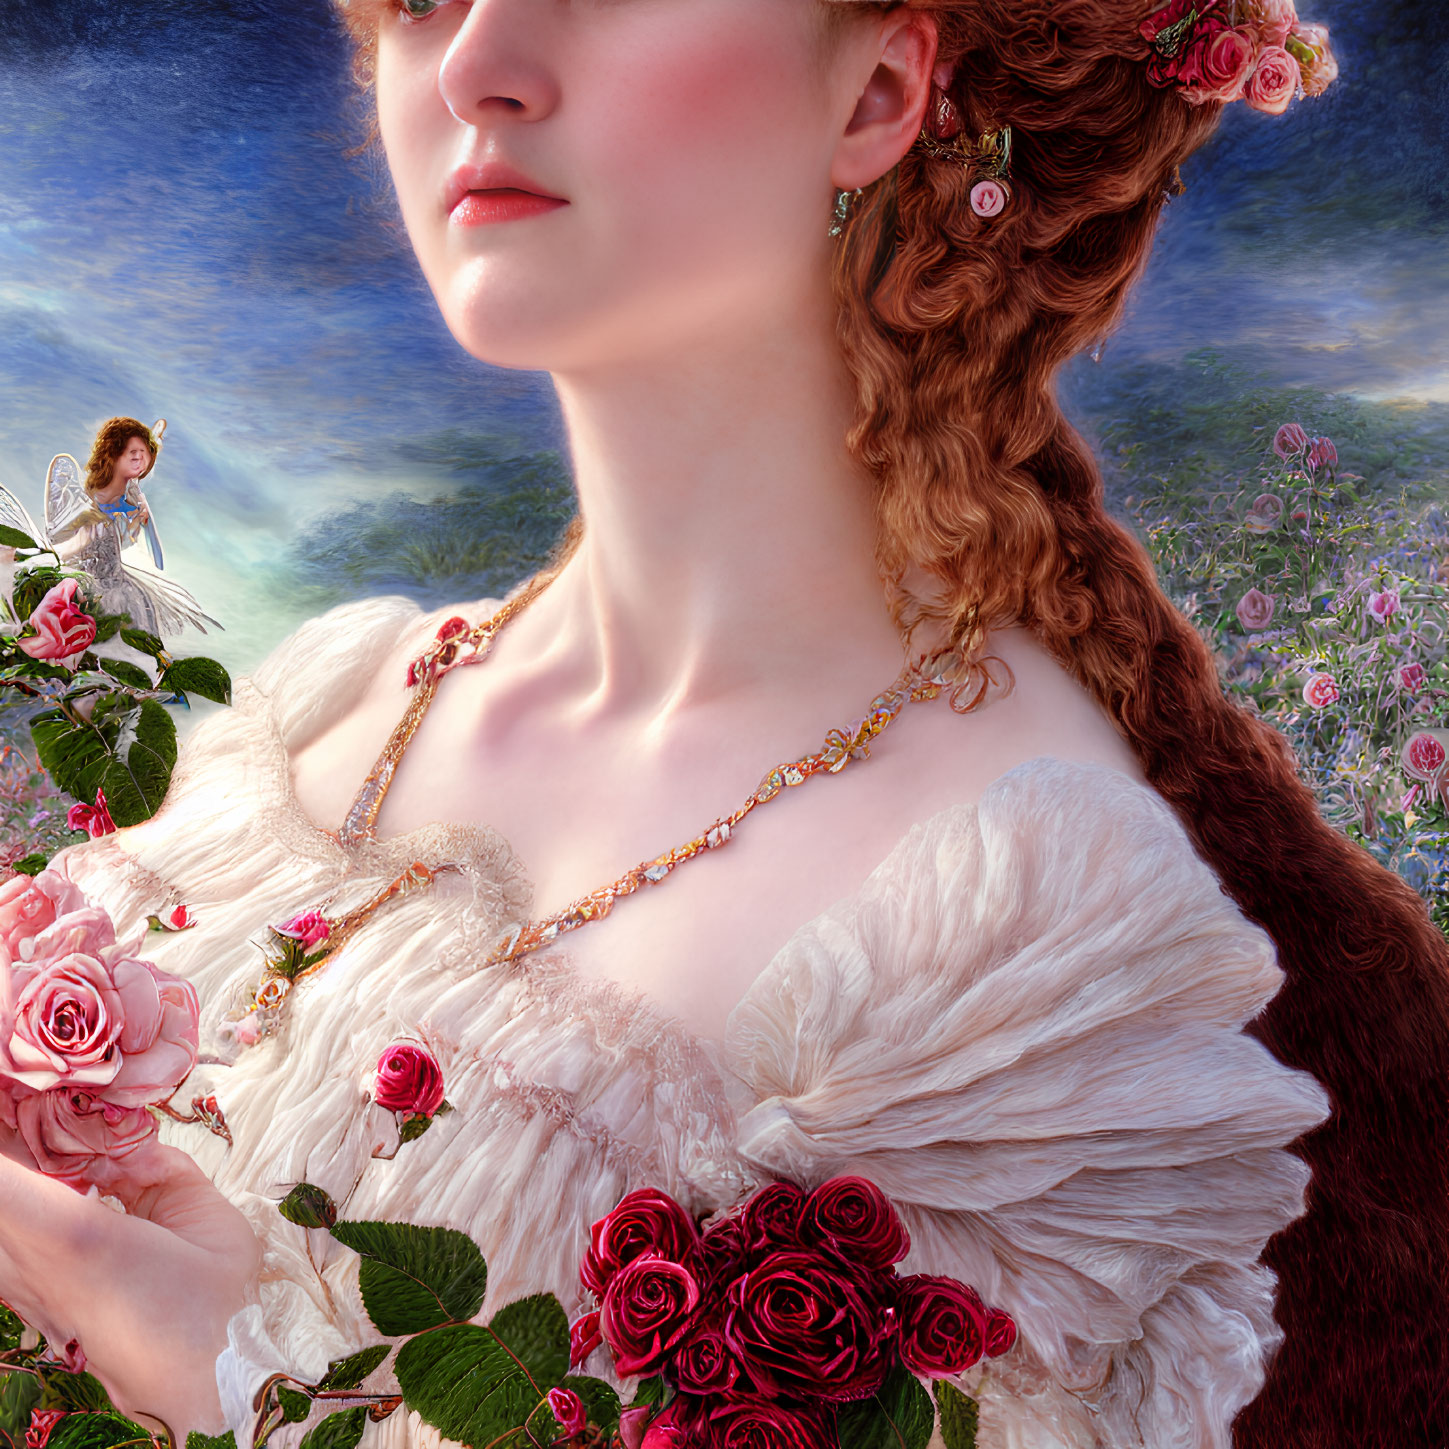 Detailed painting of woman in white dress with roses and winged fairy in rose garden under blue sky